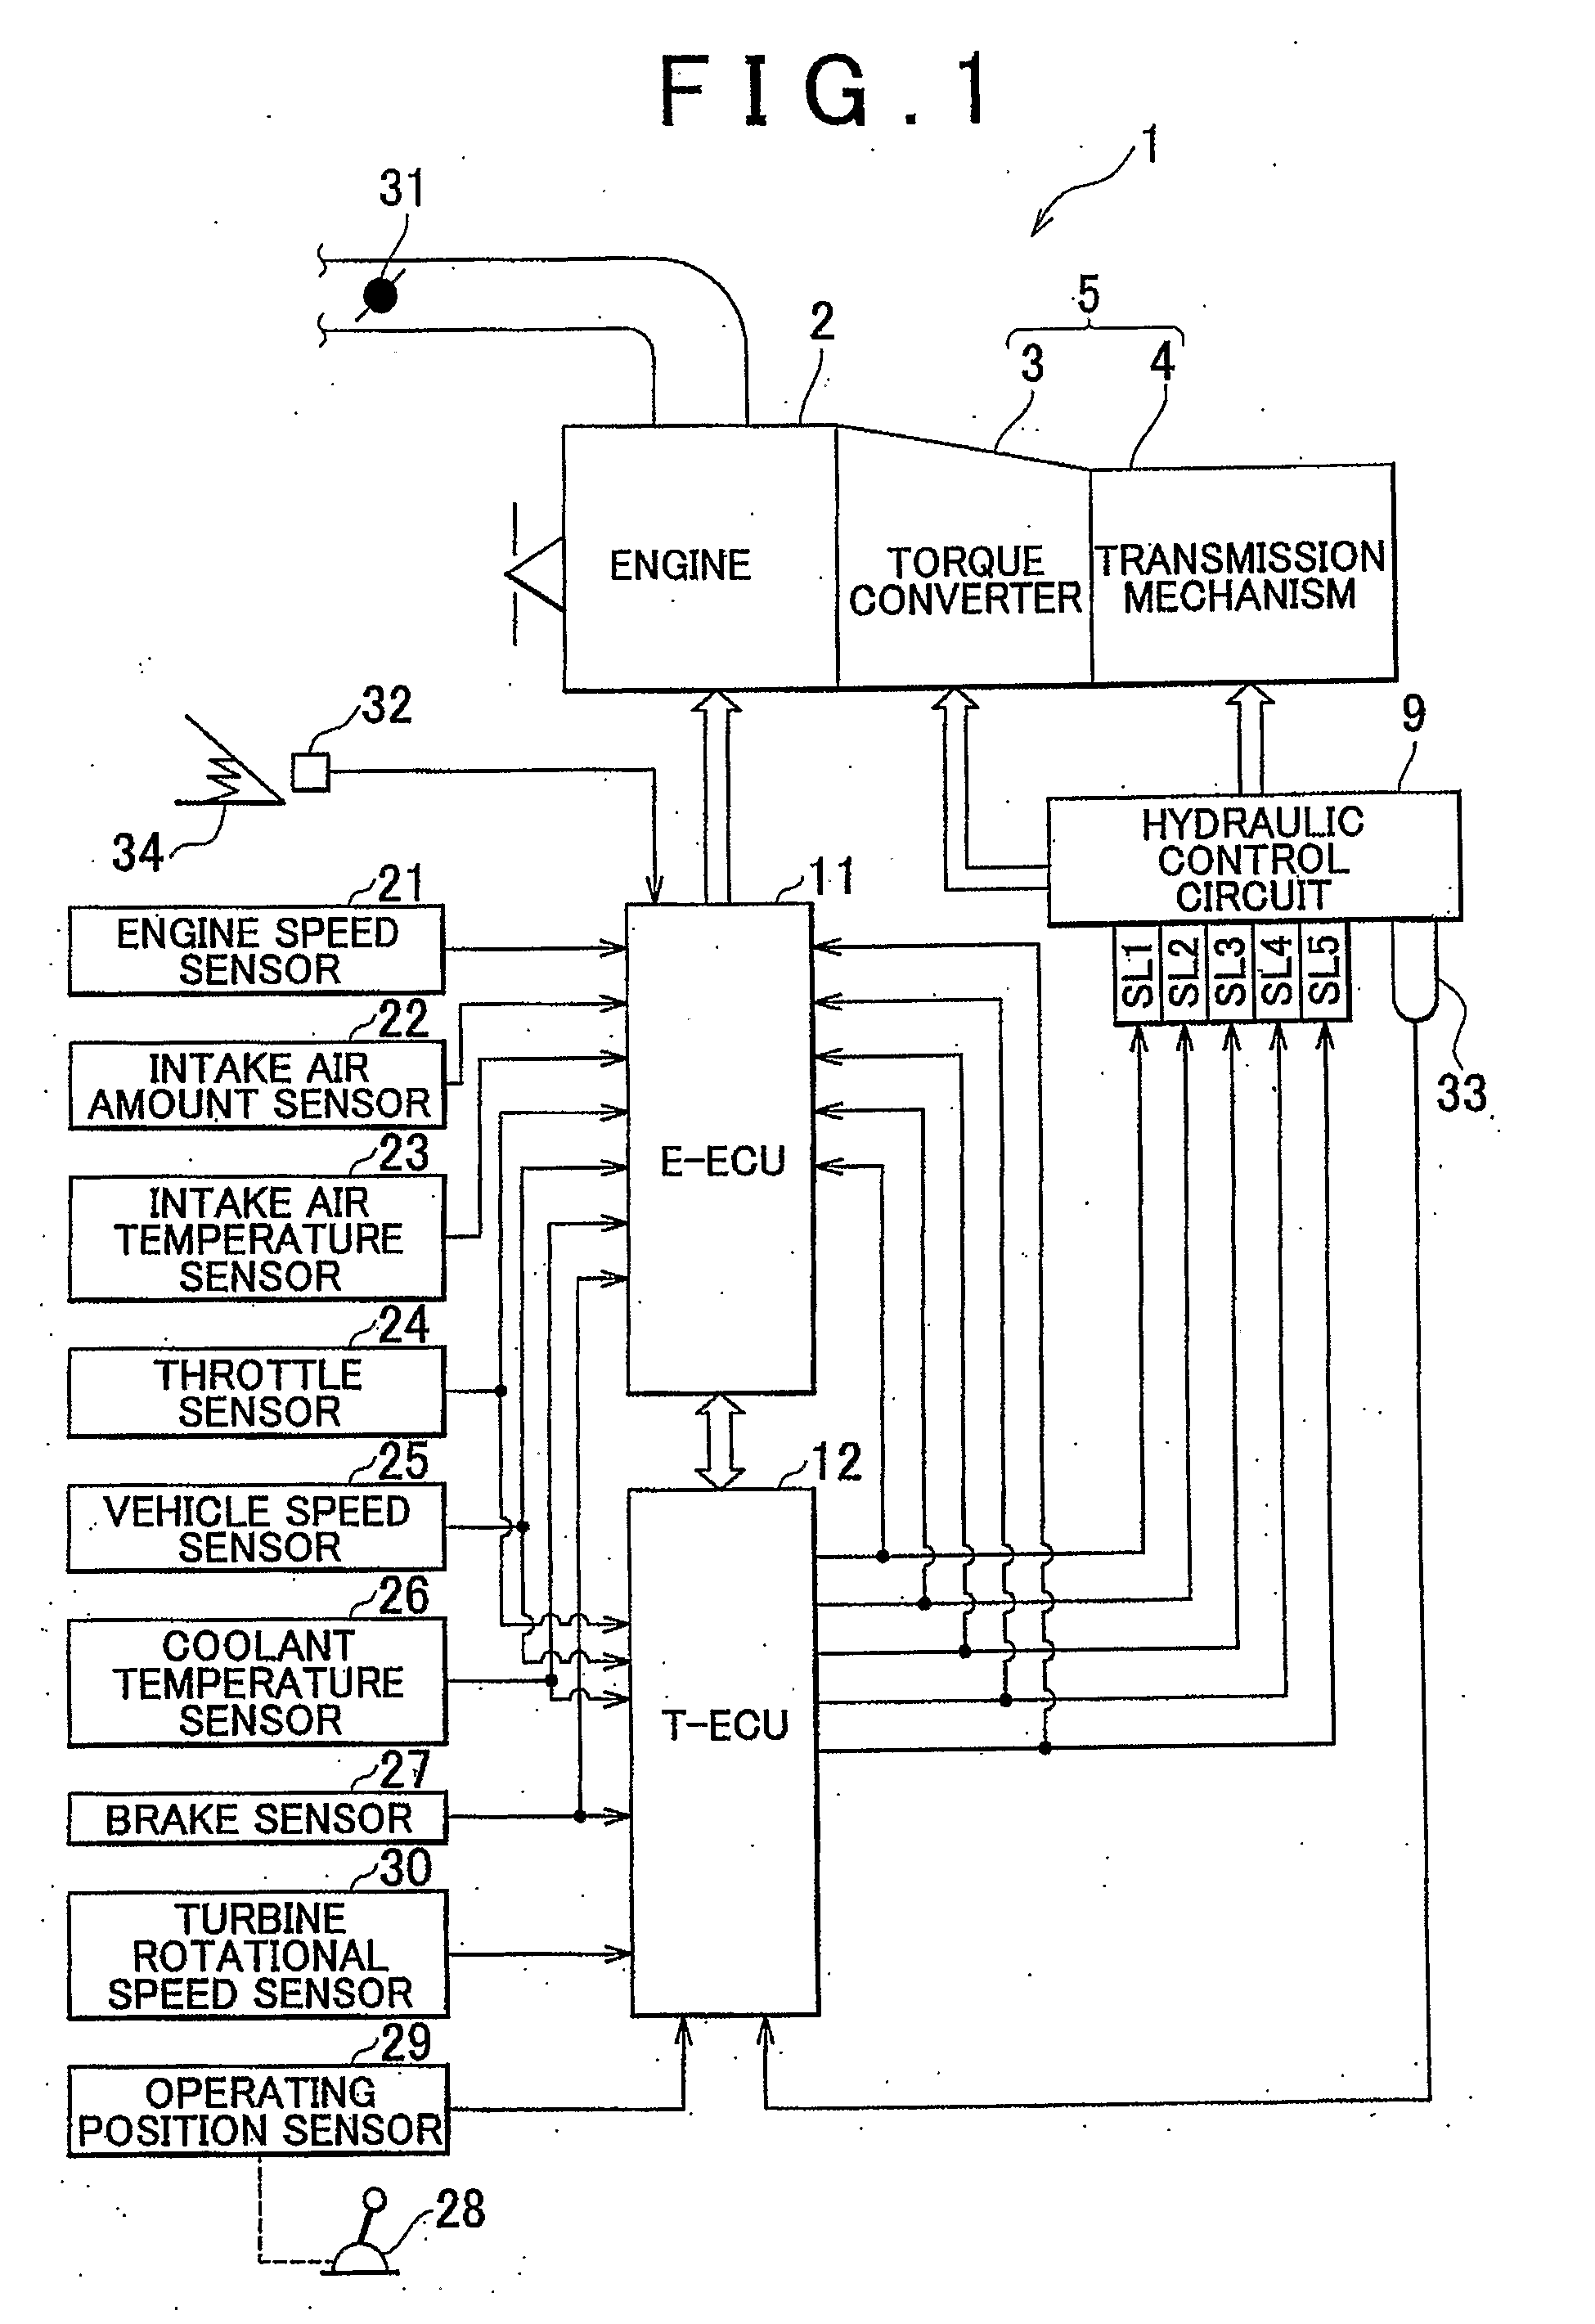 Control device for an automatic transmission